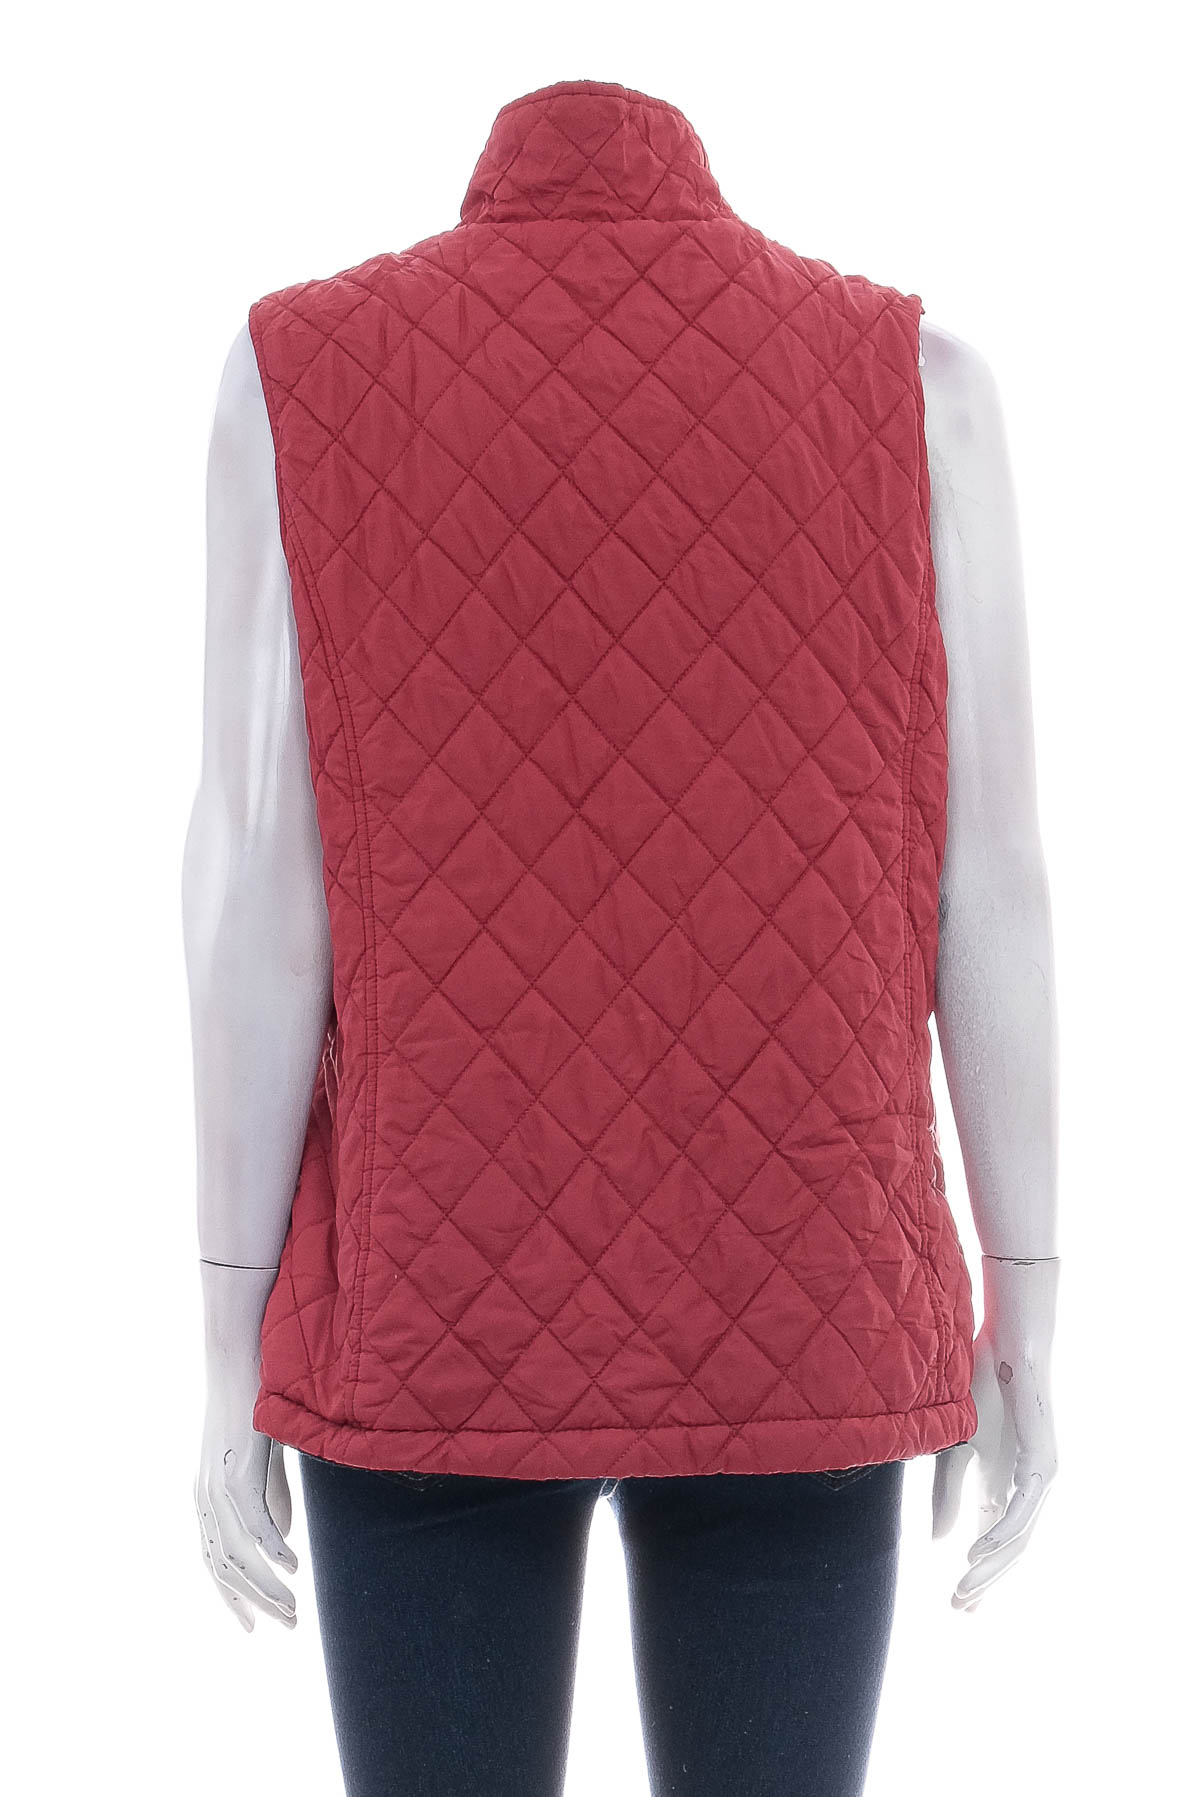 Women's reversible vest - Free Country - 2